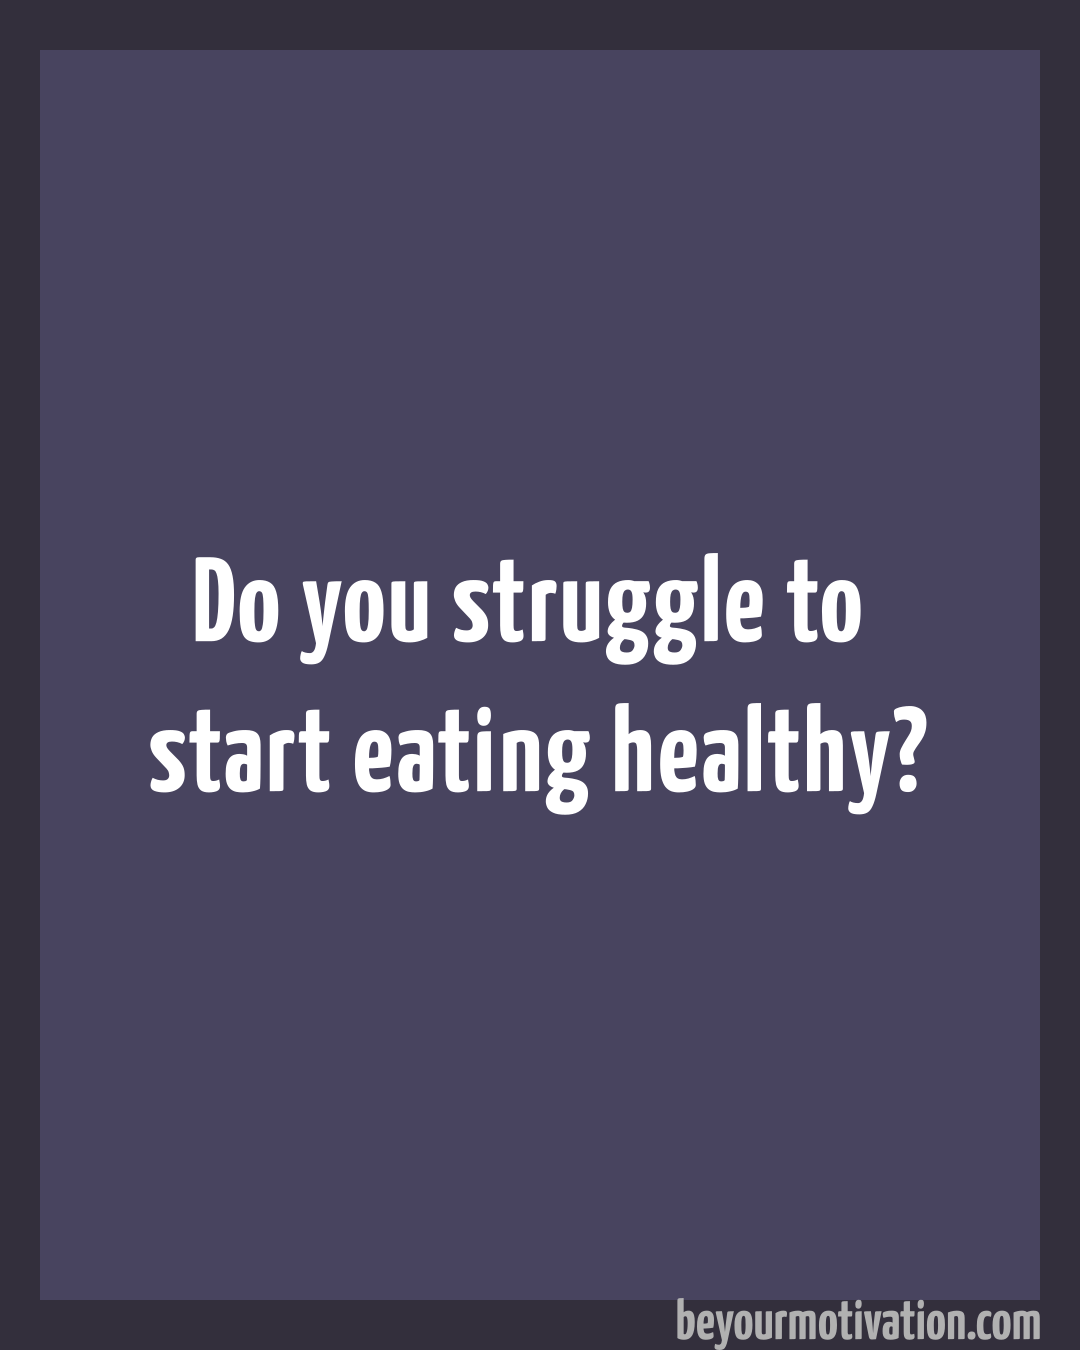 Start eating healthy cover